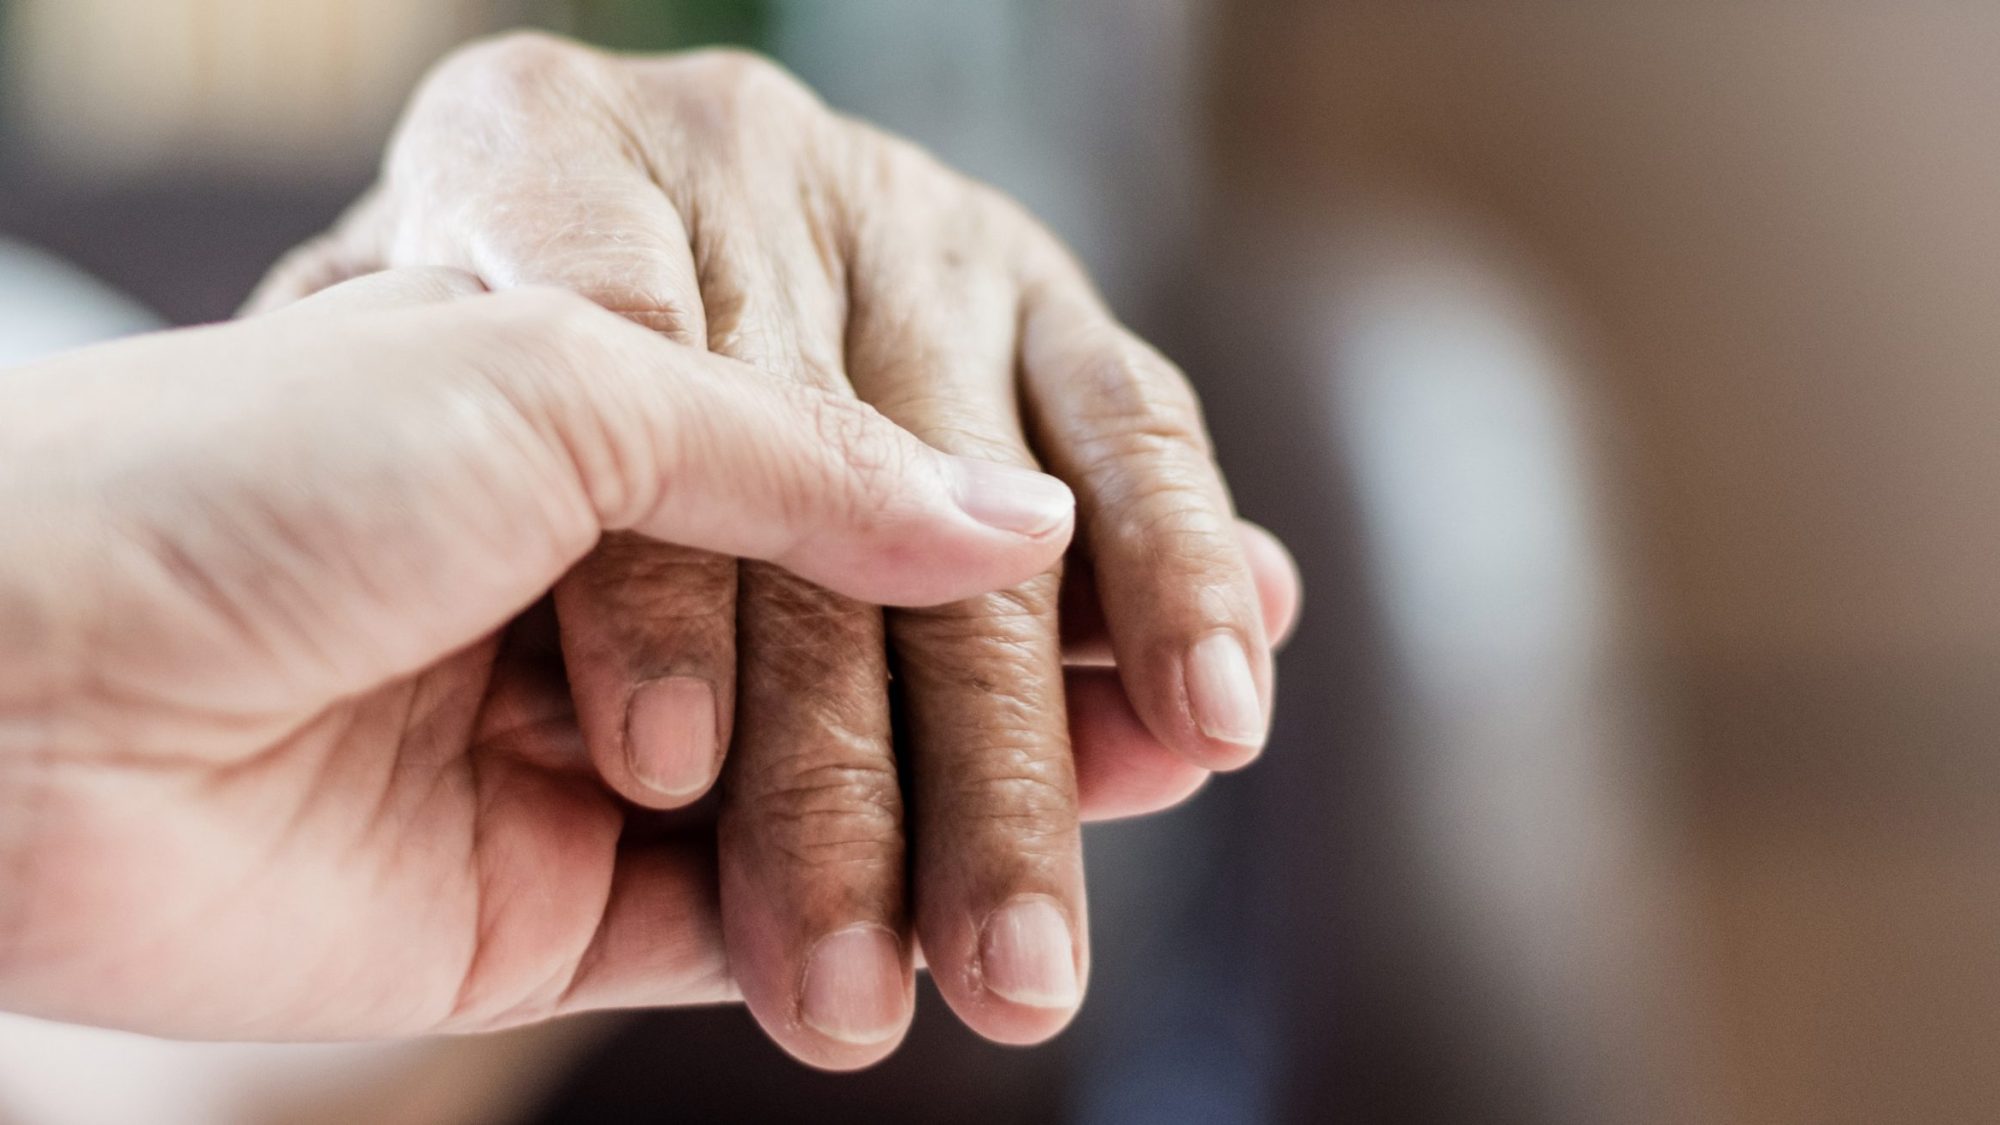 Young white female hand holding an older man of color's hand.